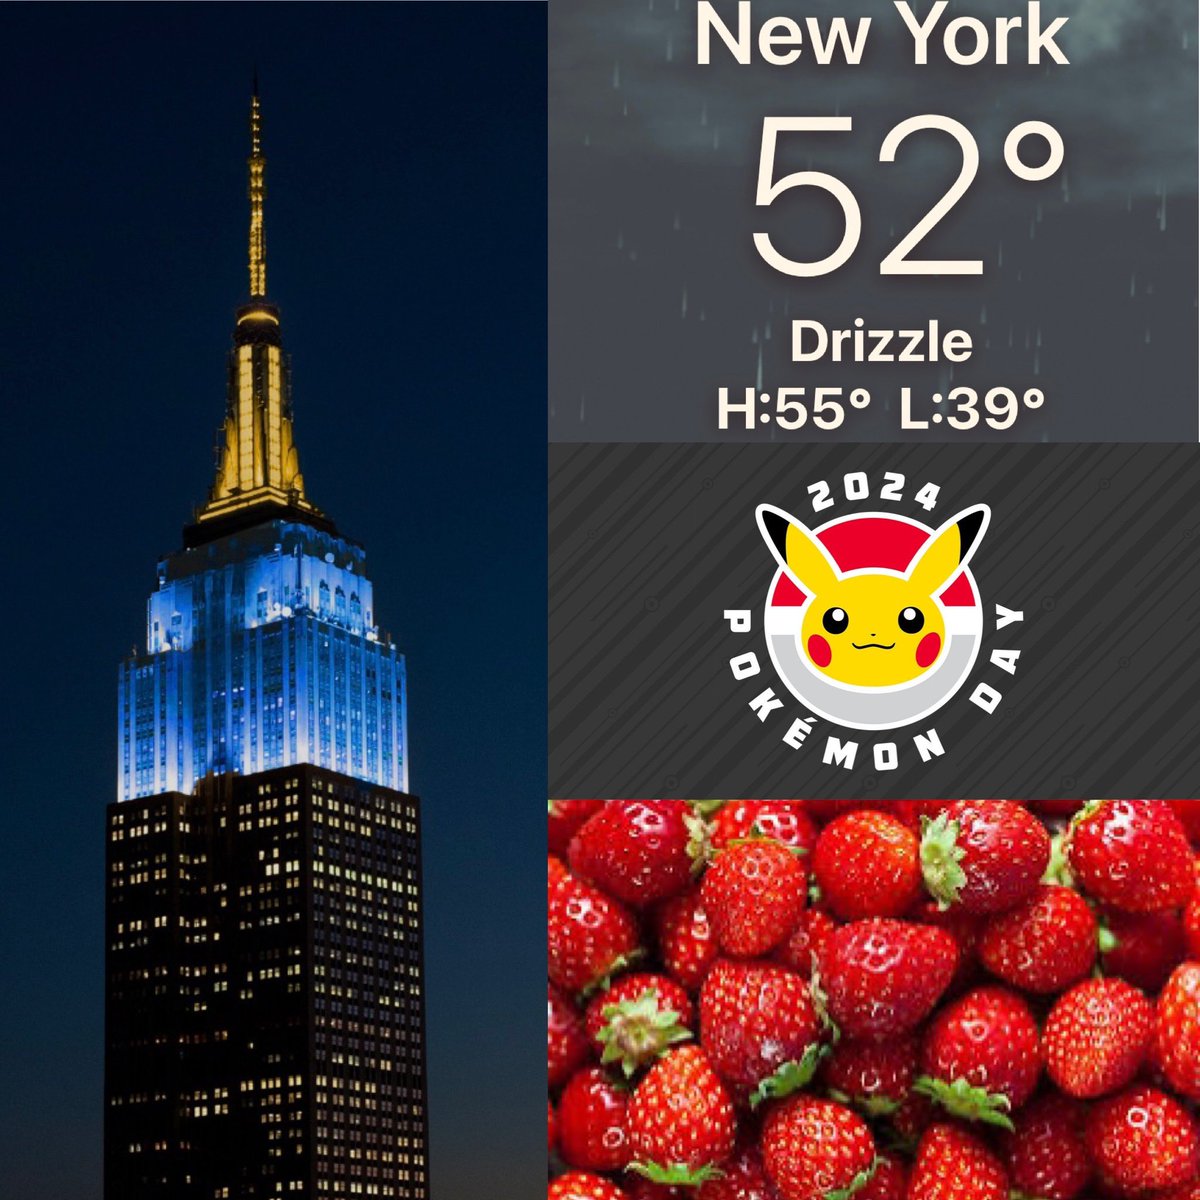 Sunset was at 5:45PM as a light rain in falling & temps in #NYC r unseasonably mild with more of the same expected tomorrow. The @EmpireStateBldg is lit to commemorate the launch of @Pokemon in 1996 & #FruitFans are celebrating #NationalStrawberryDay🍓@NationalDayCal @NY1weather